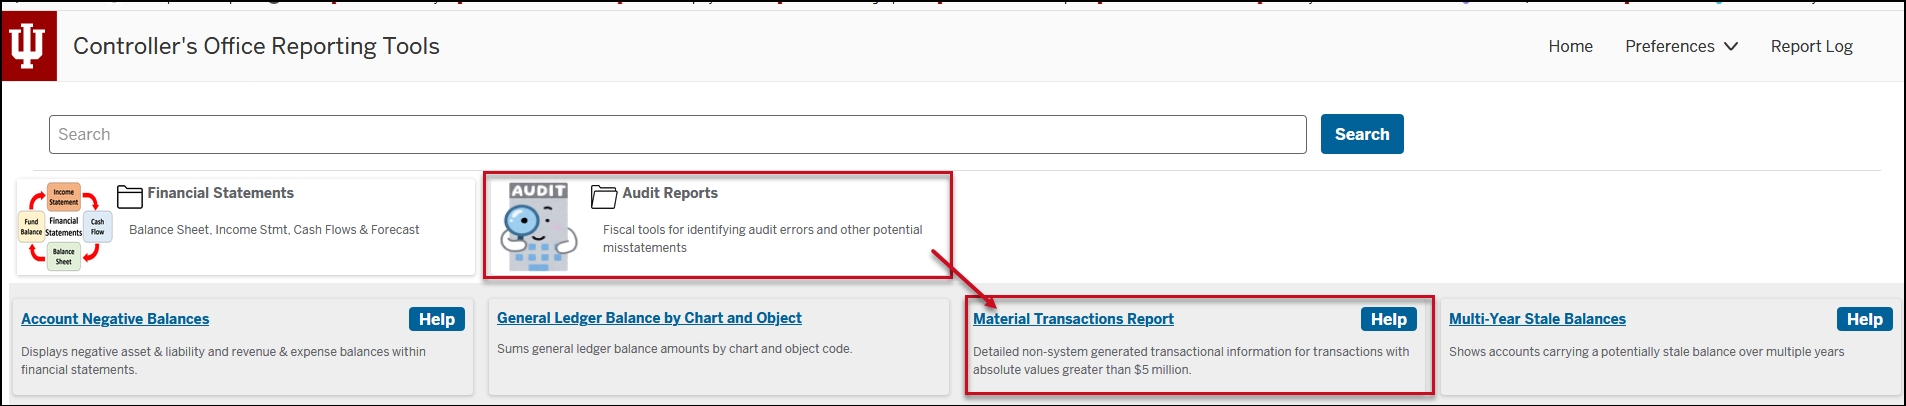 Screenshot highlighting where to click to find the Material Transactions Report